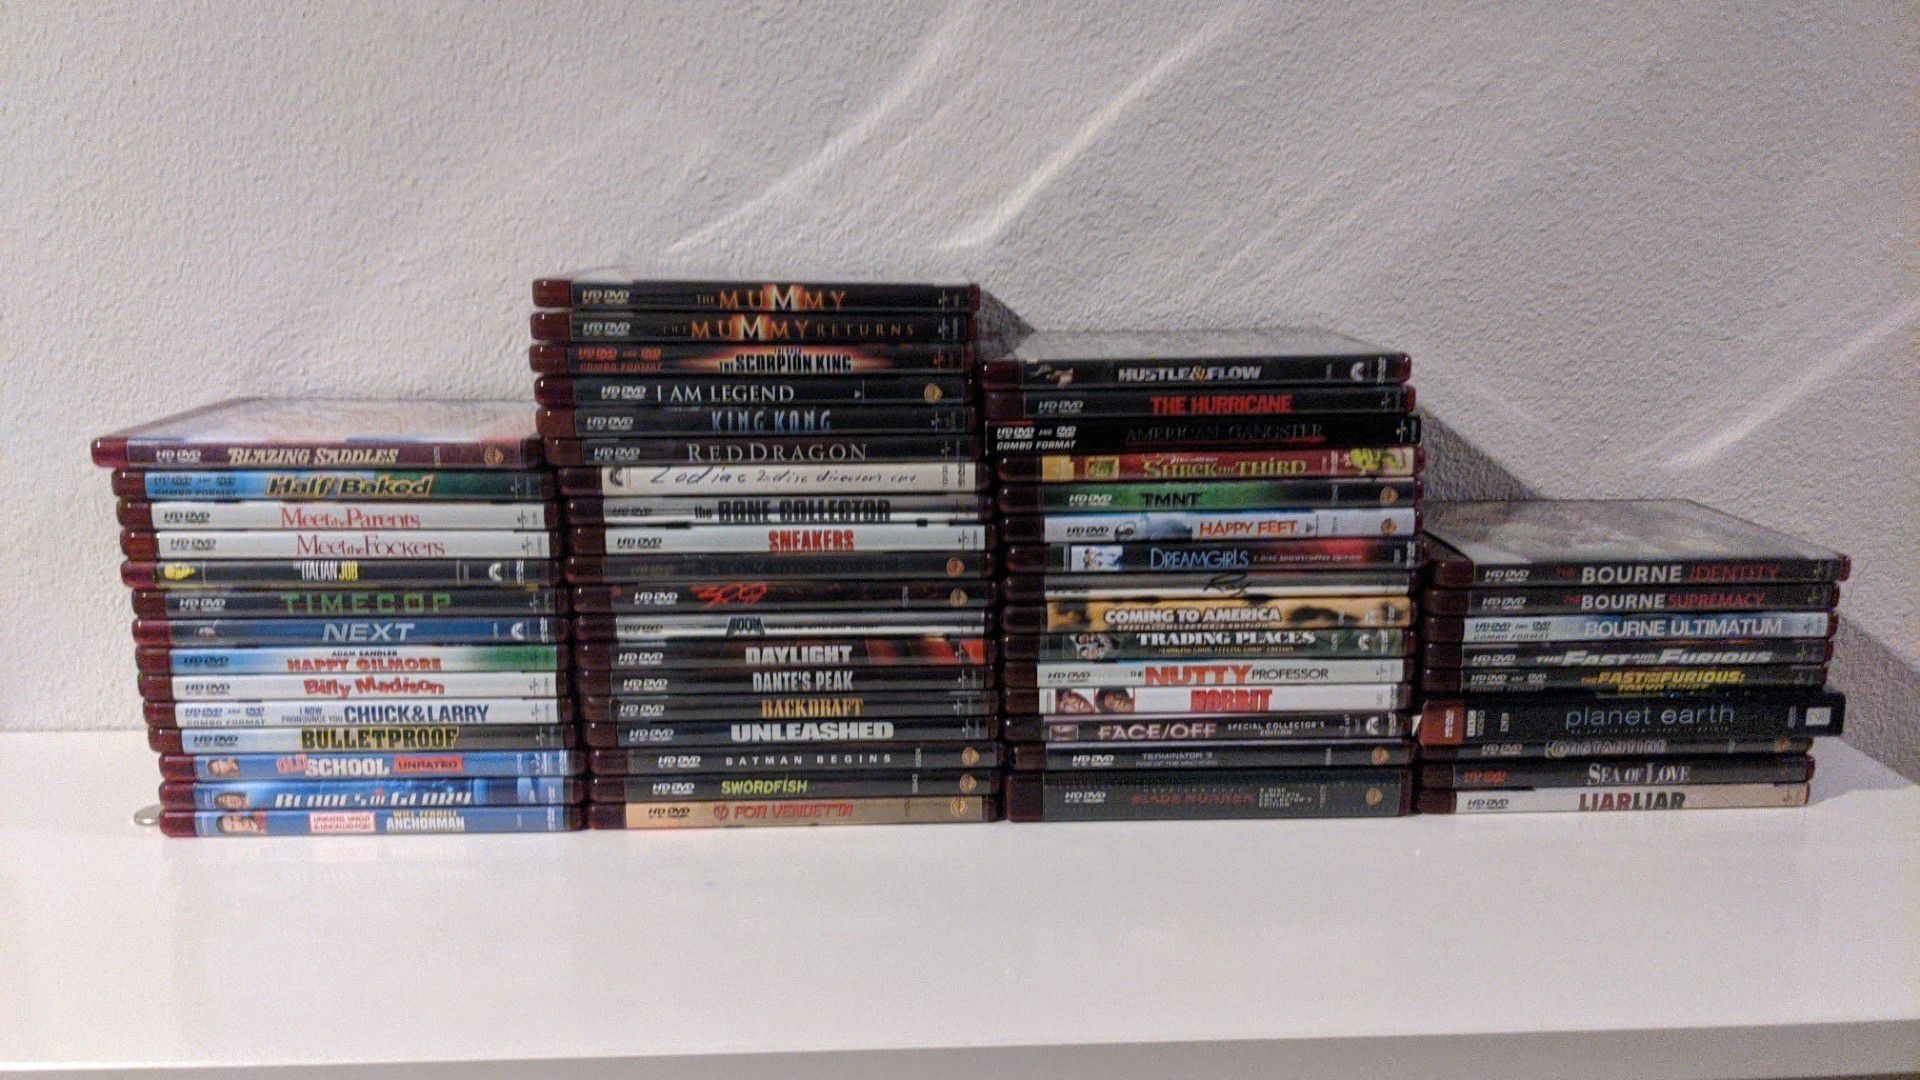 Hd-dvds collection